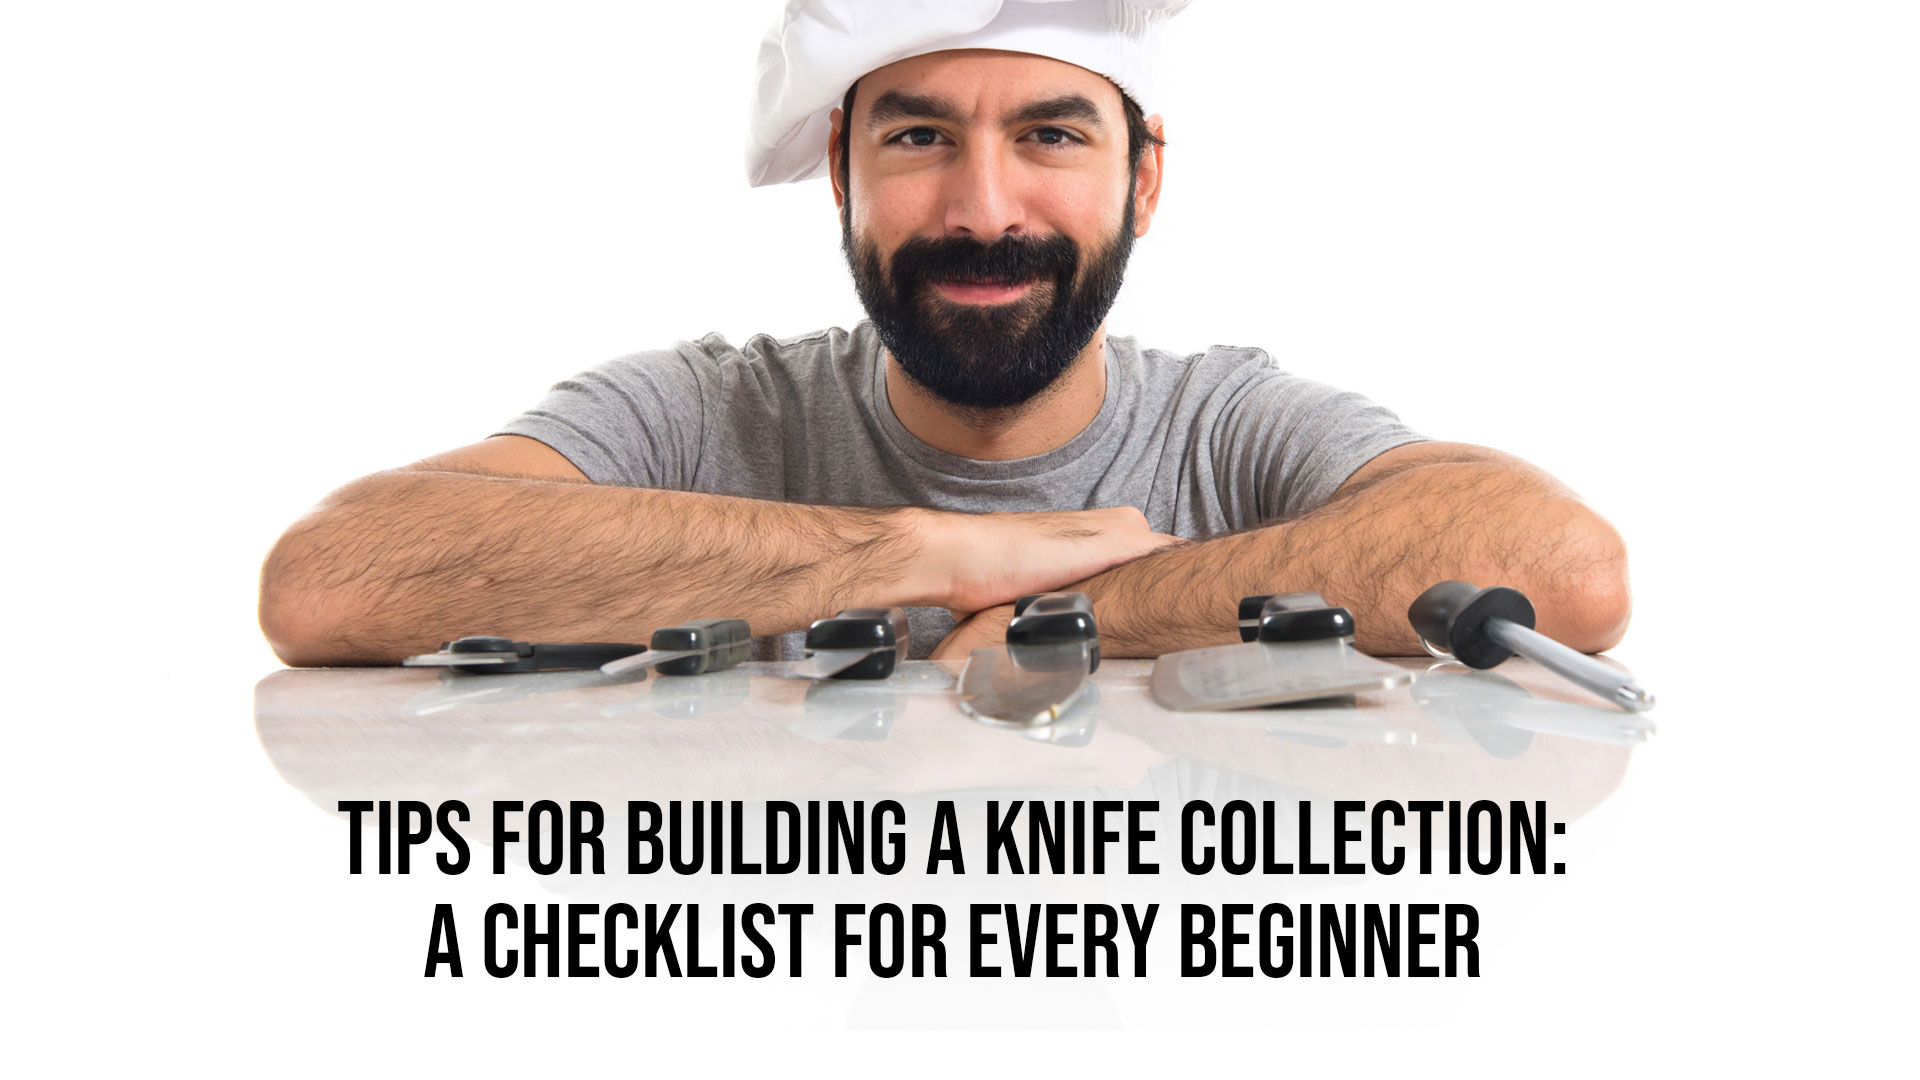 Tips for Building a Knife Collection: A Checklist for Every Beginner